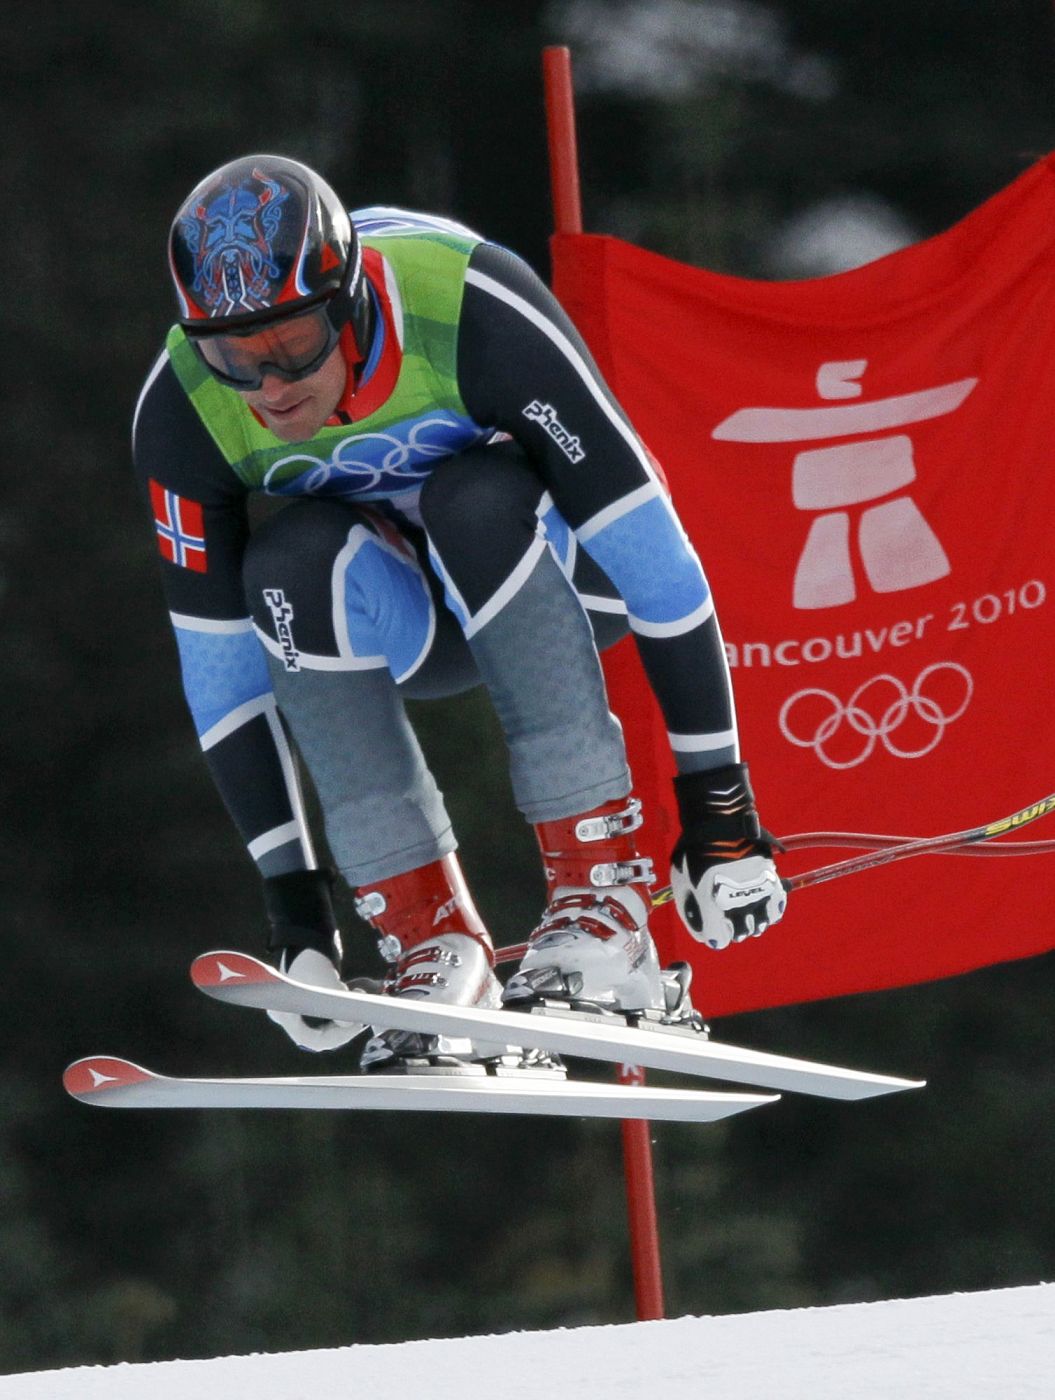 Svindal of Norway is airborne during the men's Alpine Skiing Downhill race of the Vancouver 2010 Winter Olympics in Whistler